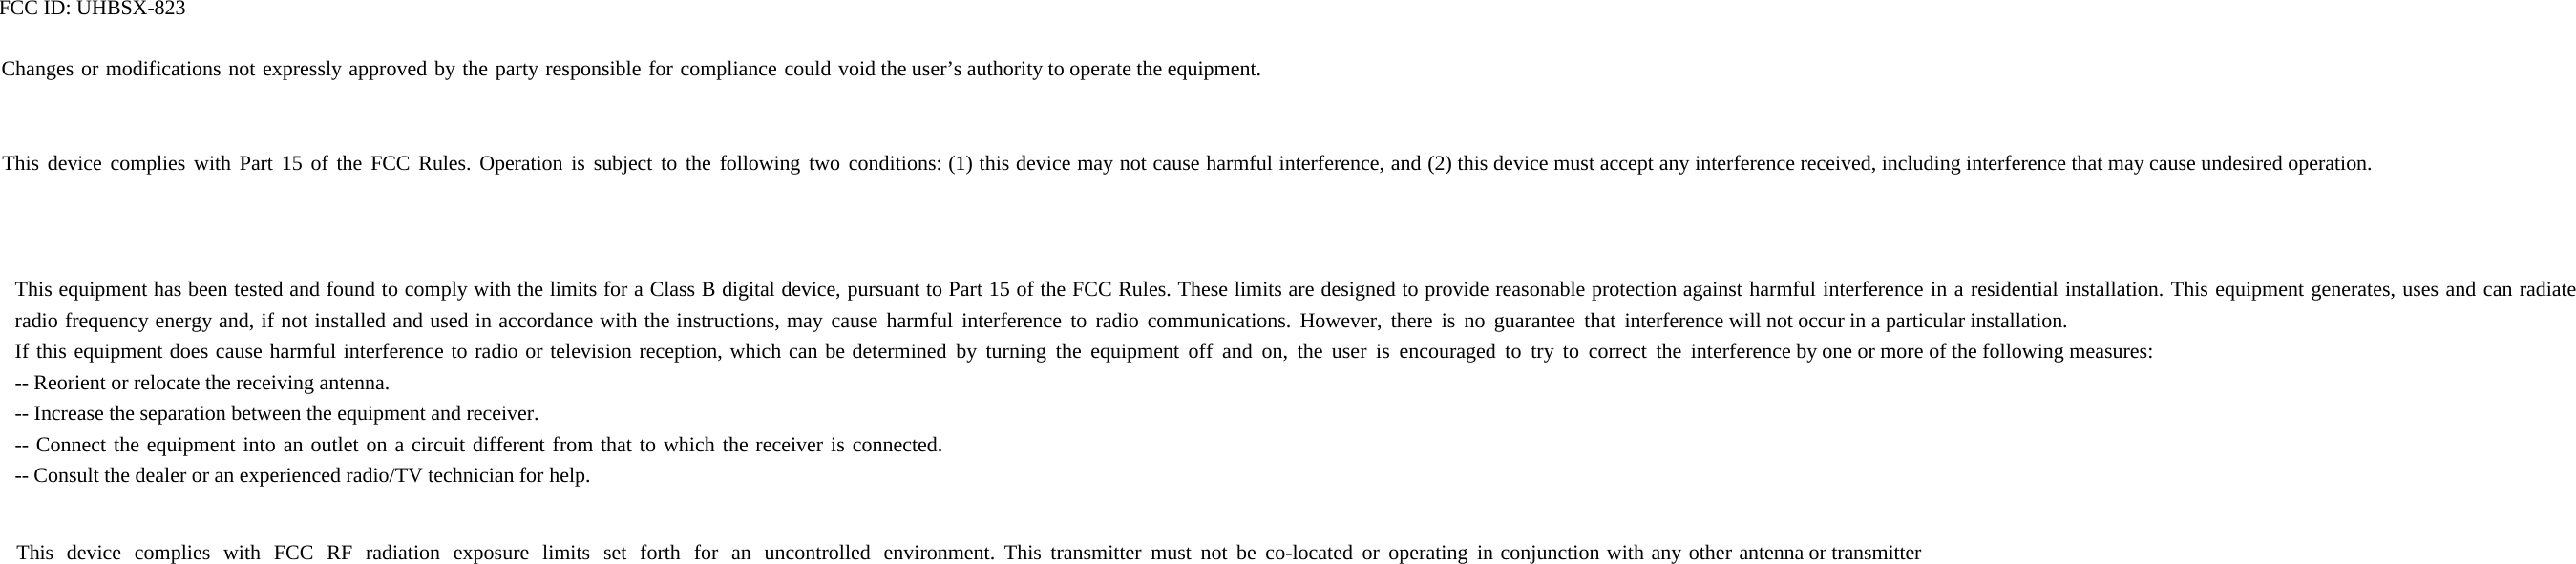 FCC ID: UHBSX-823 Changes or modifications not expressly approved by the party responsible for compliance could void the user’s authority to operate the equipment. This device complies with Part 15 of the FCC Rules. Operation is subject to the following two conditions: (1) this device may not cause harmful interference, and (2) this device must accept any interference received, including interference that may cause undesired operation. This equipment has been tested and found to comply with the limits for a Class B digital device, pursuant to Part 15 of the FCC Rules. These limits are designed to provide reasonable protection against harmful interference in a residential installation. This equipment generates, uses and can radiate radio frequency energy and, if not installed and used in accordance with the instructions, may cause harmful interference to radio communications. However, there is no guarantee that interference will not occur in a particular installation. If this equipment does cause harmful interference to radio or television reception, which can be determined by turning the equipment off and on, the user is encouraged to try to correct the interference by one or more of the following measures: -- Reorient or relocate the receiving antenna. -- Increase the separation between the equipment and receiver. -- Connect the equipment into an outlet on a circuit different from that to which the receiver is connected. -- Consult the dealer or an experienced radio/TV technician for help. This device complies with FCC RF radiation exposure limits set forth for an uncontrolled environment. This transmitter must not be co-located or operating in conjunction with any other antenna or transmitter   